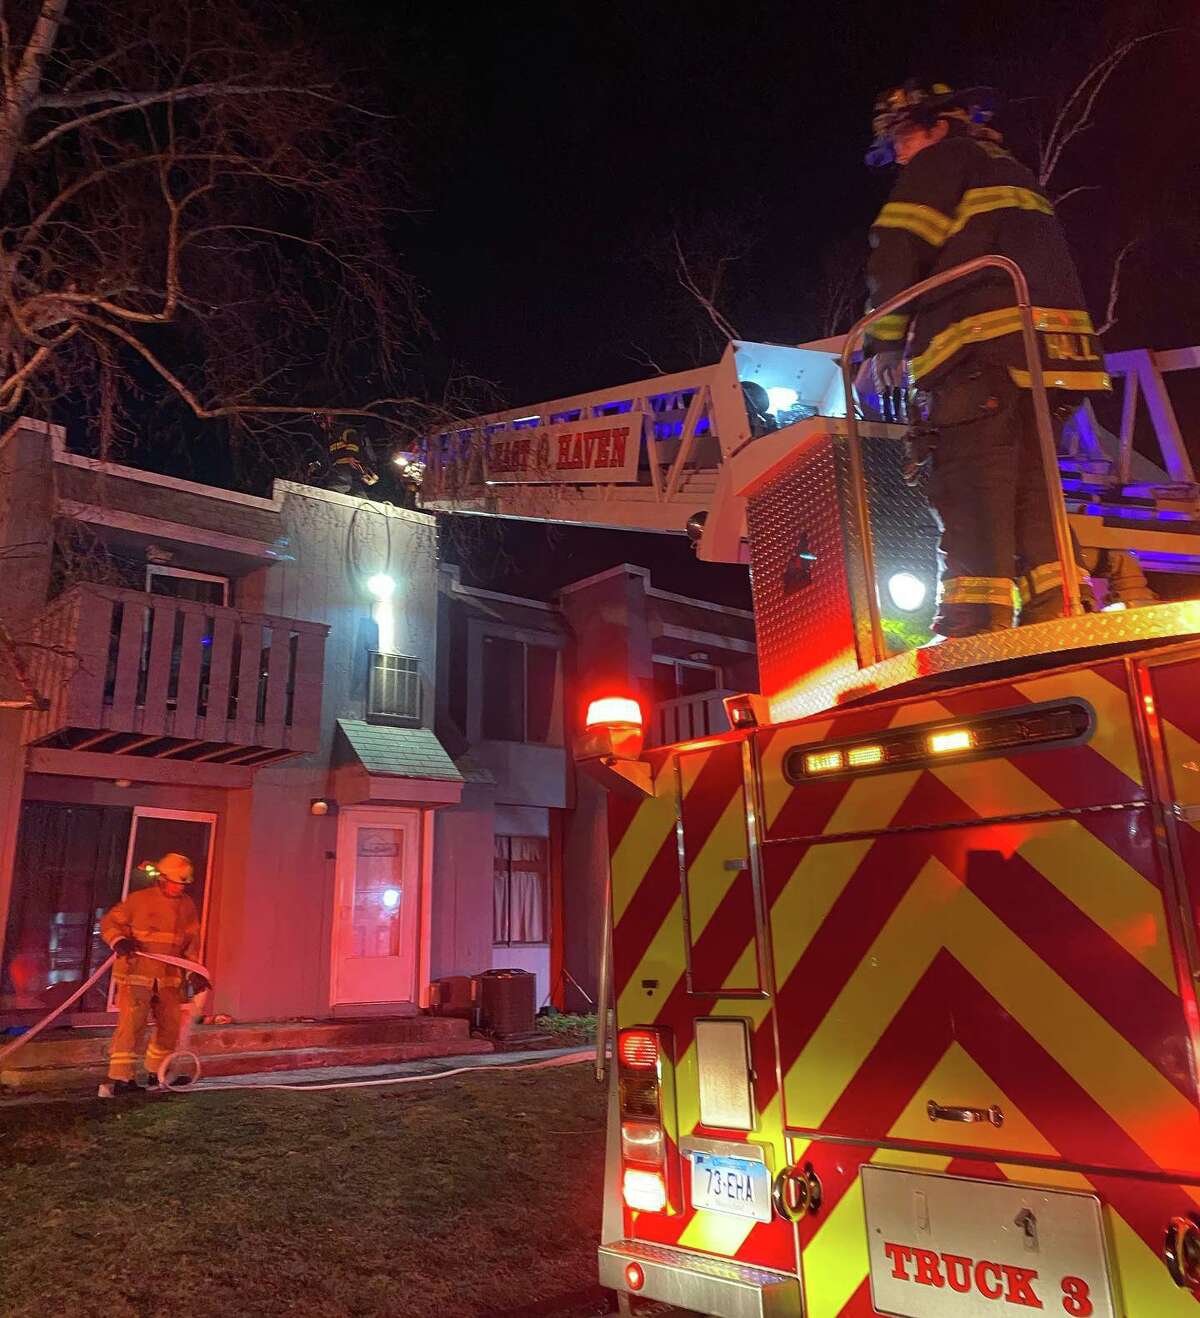 Firefighters extinguished a blaze at a condominium complex late Monday, according to the East Haven firefighters’ union.